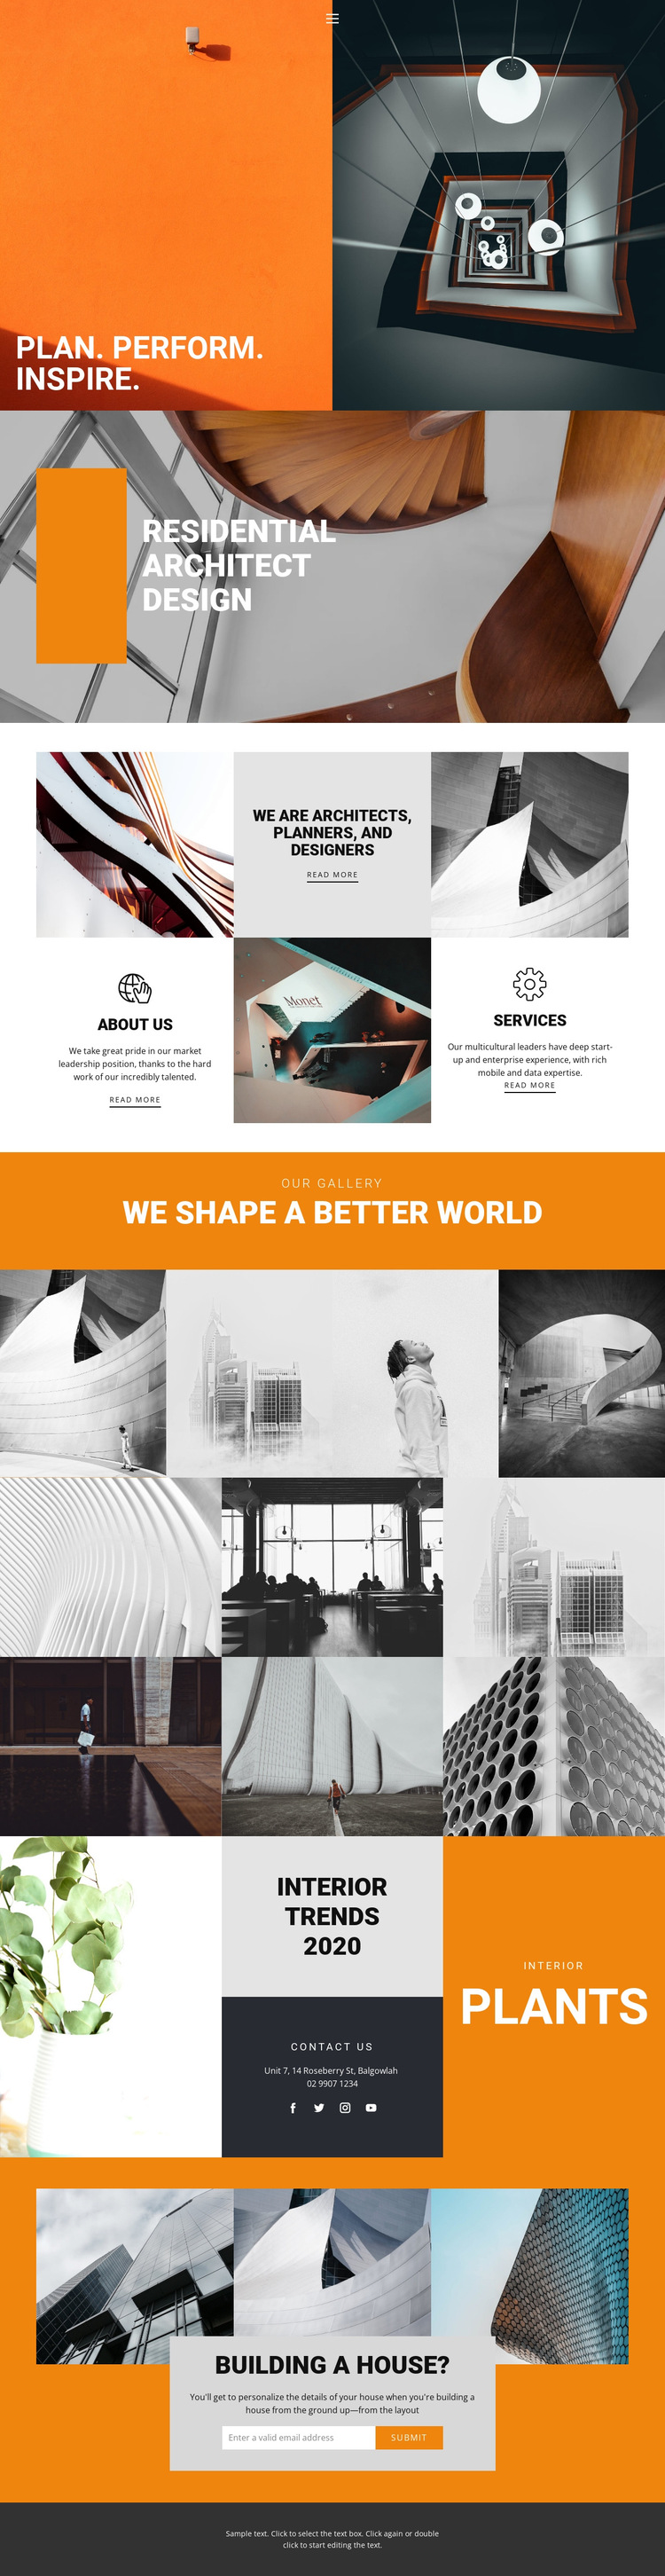 Inspiring ways of architecture HTML5 Template